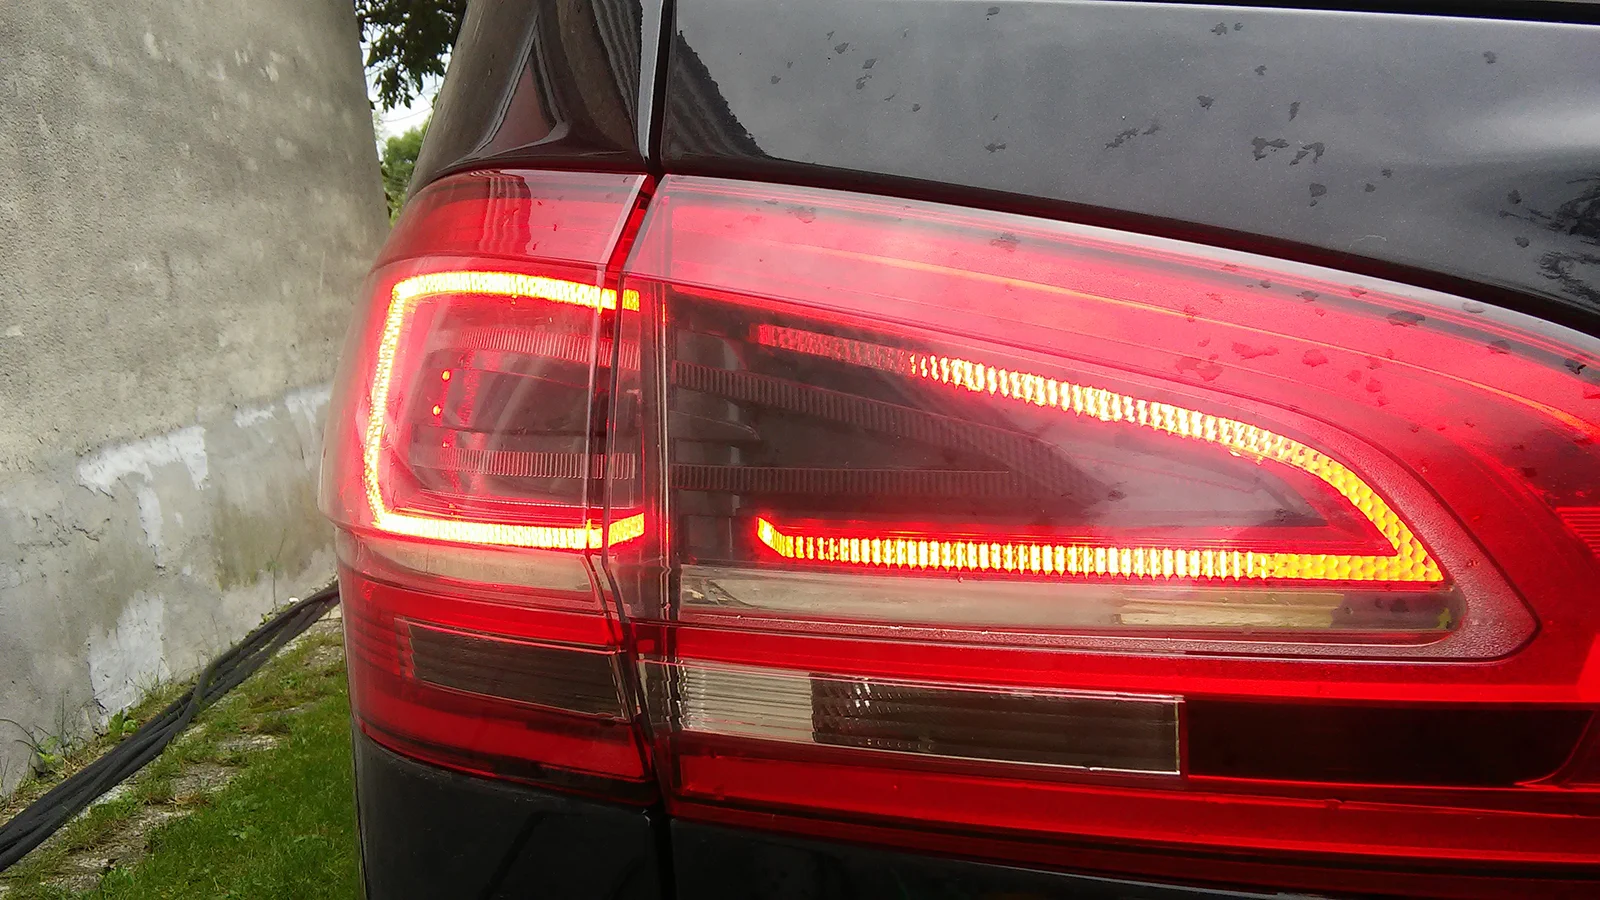 Ford S-Max rear tailgate lamp - OPG Blog